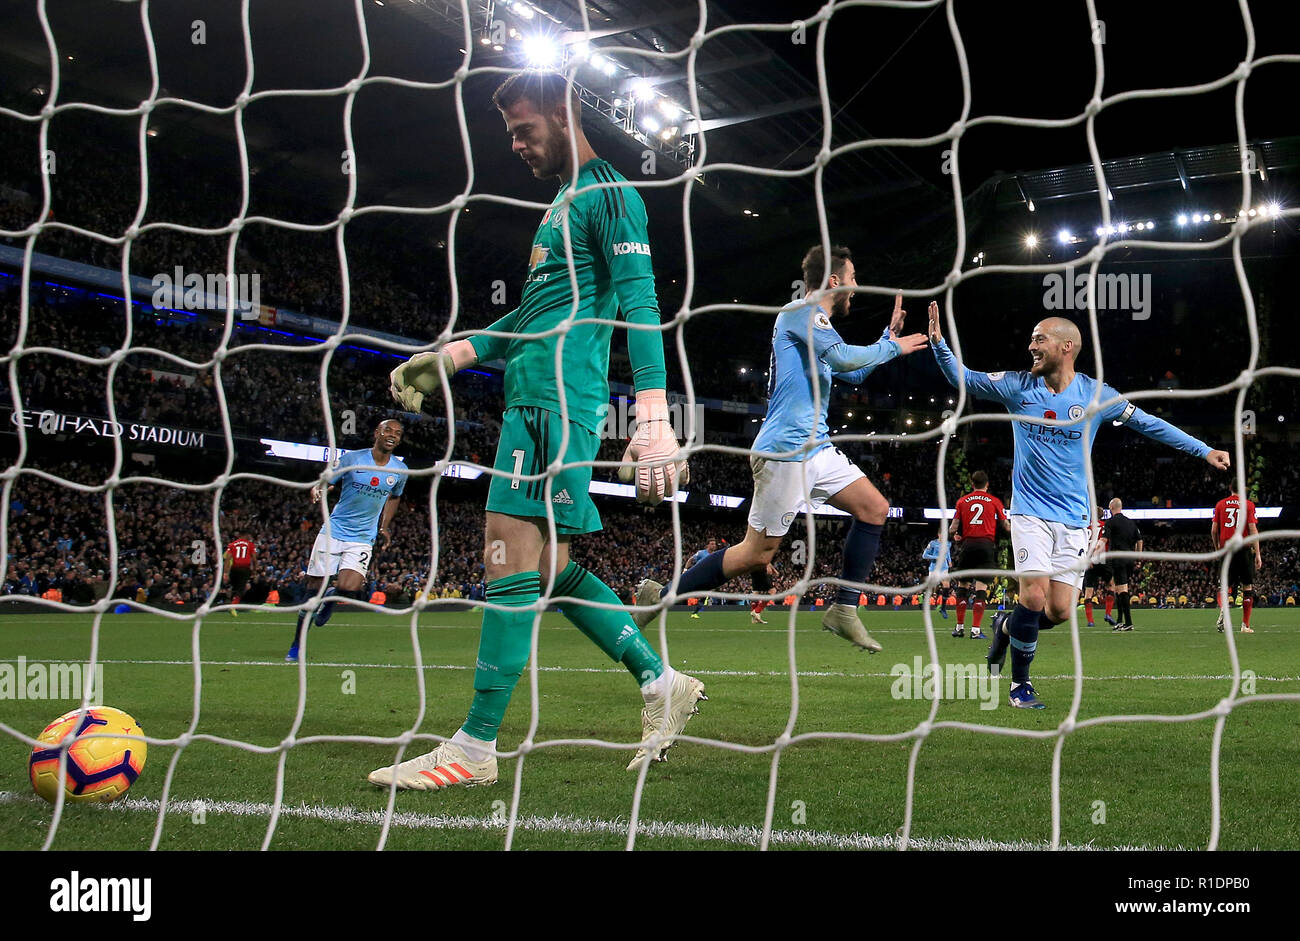 Manchester United goalkeeper David de Gea (left) appears dejected after Manchester City's Ilkay Gundogan (not in picture) scores his side's third goal of the game during the Premier League match at the Etihad Stadium, Manchester. Stock Photo